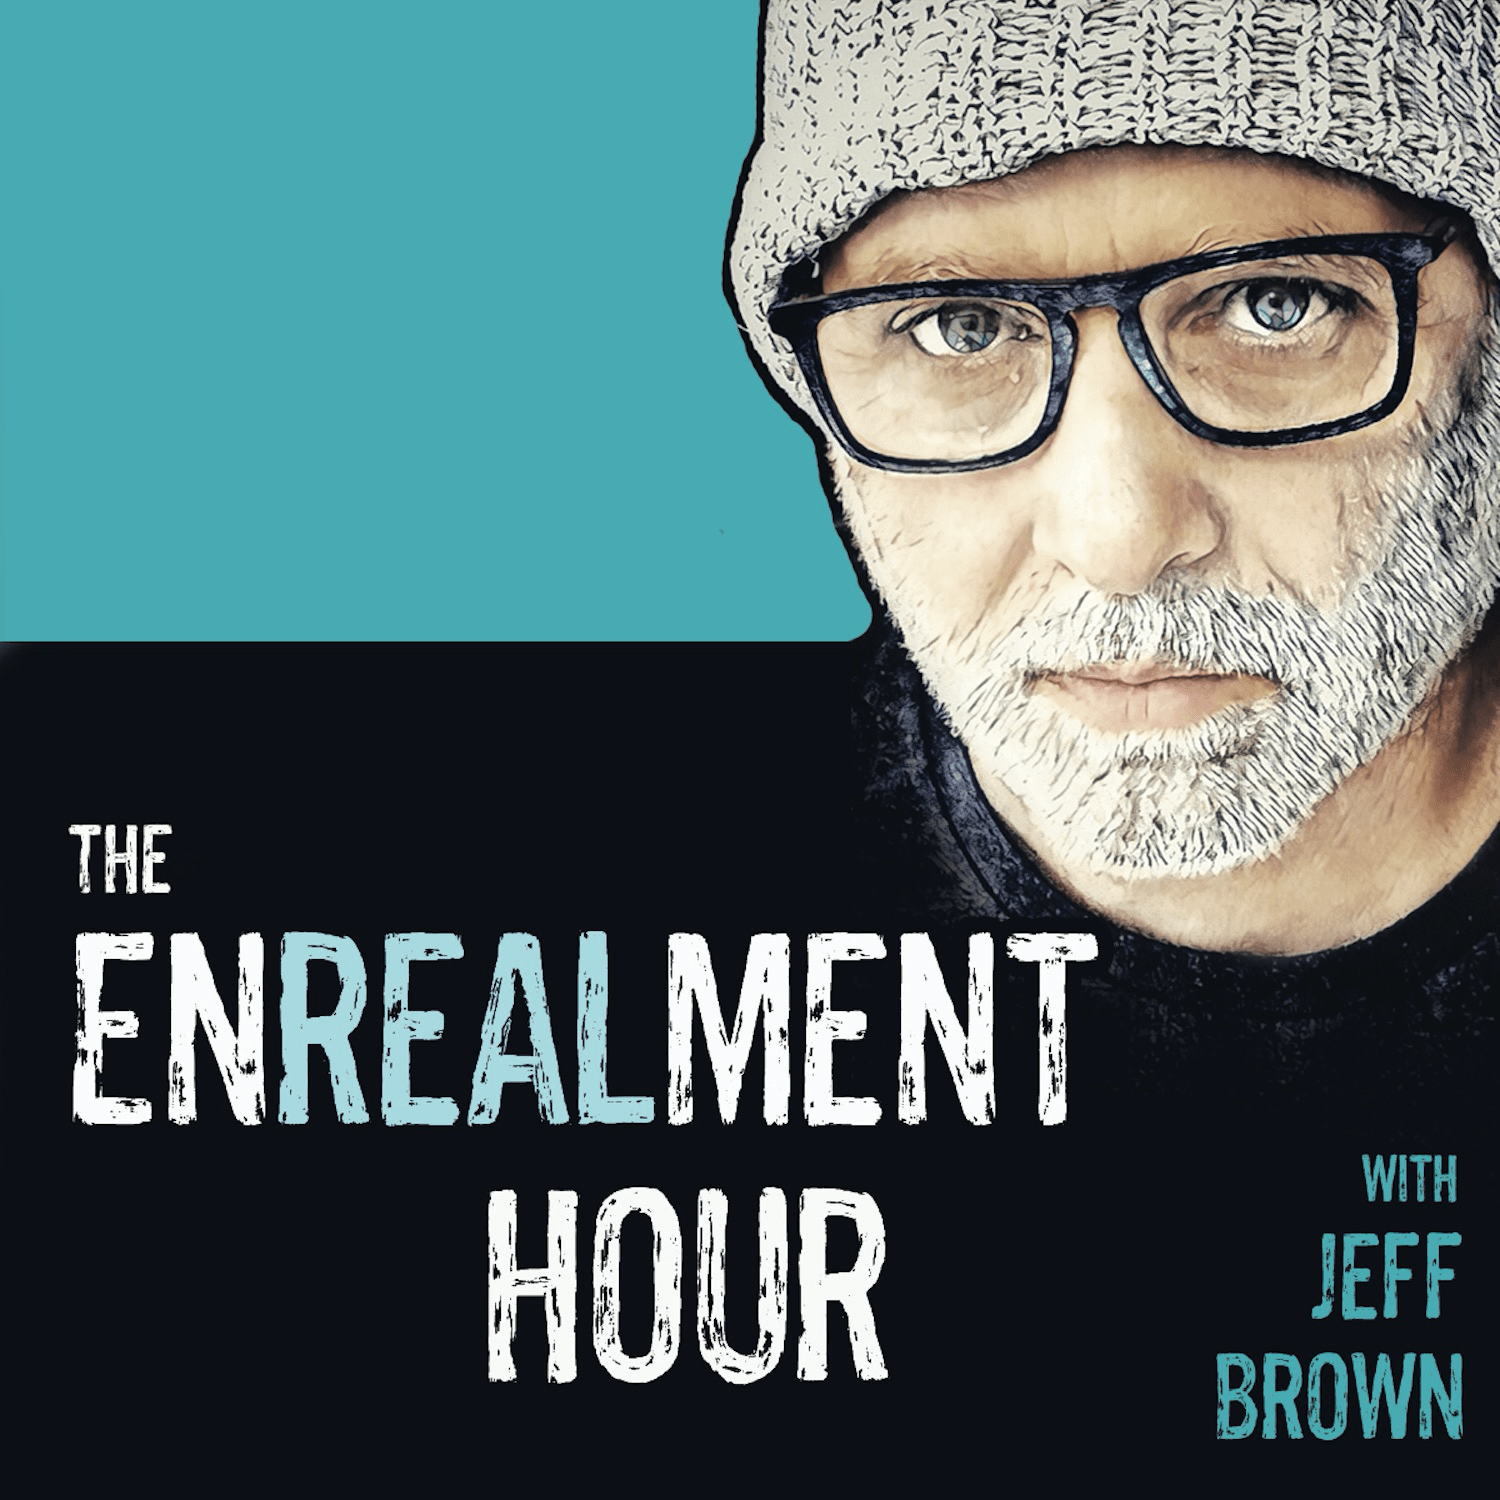 Conversation with Jeff Brown on The Enrealment Hour - The Embodied Present Process